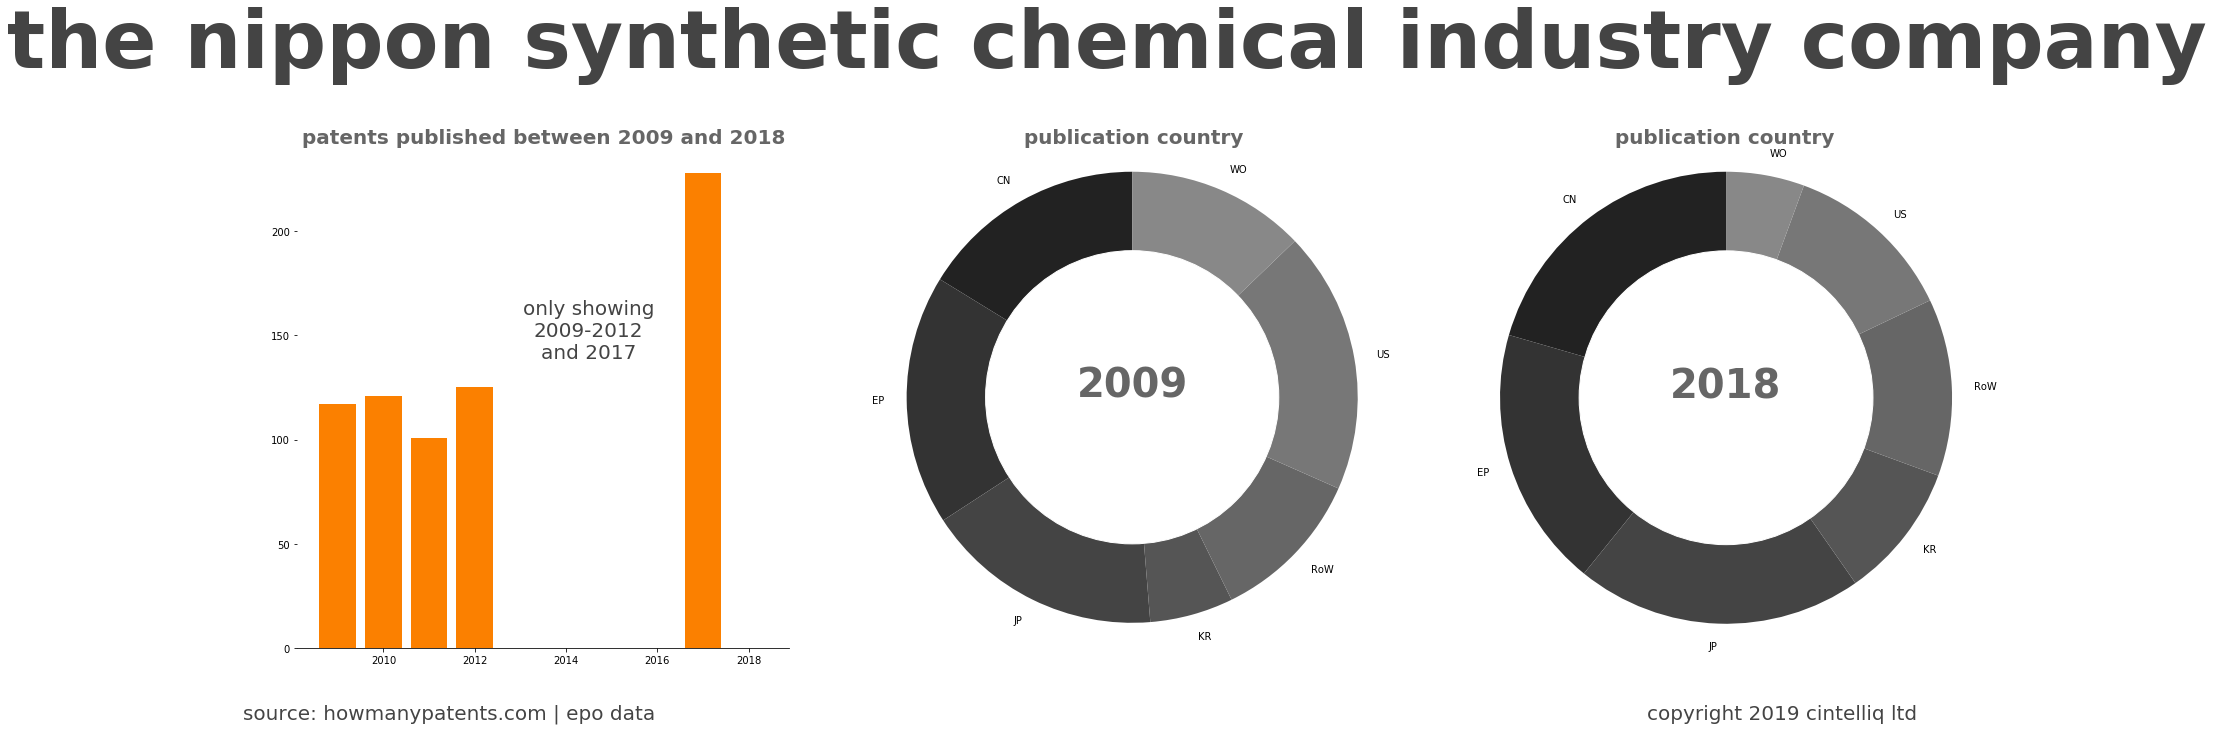 summary of patents for The Nippon Synthetic Chemical Industry Company